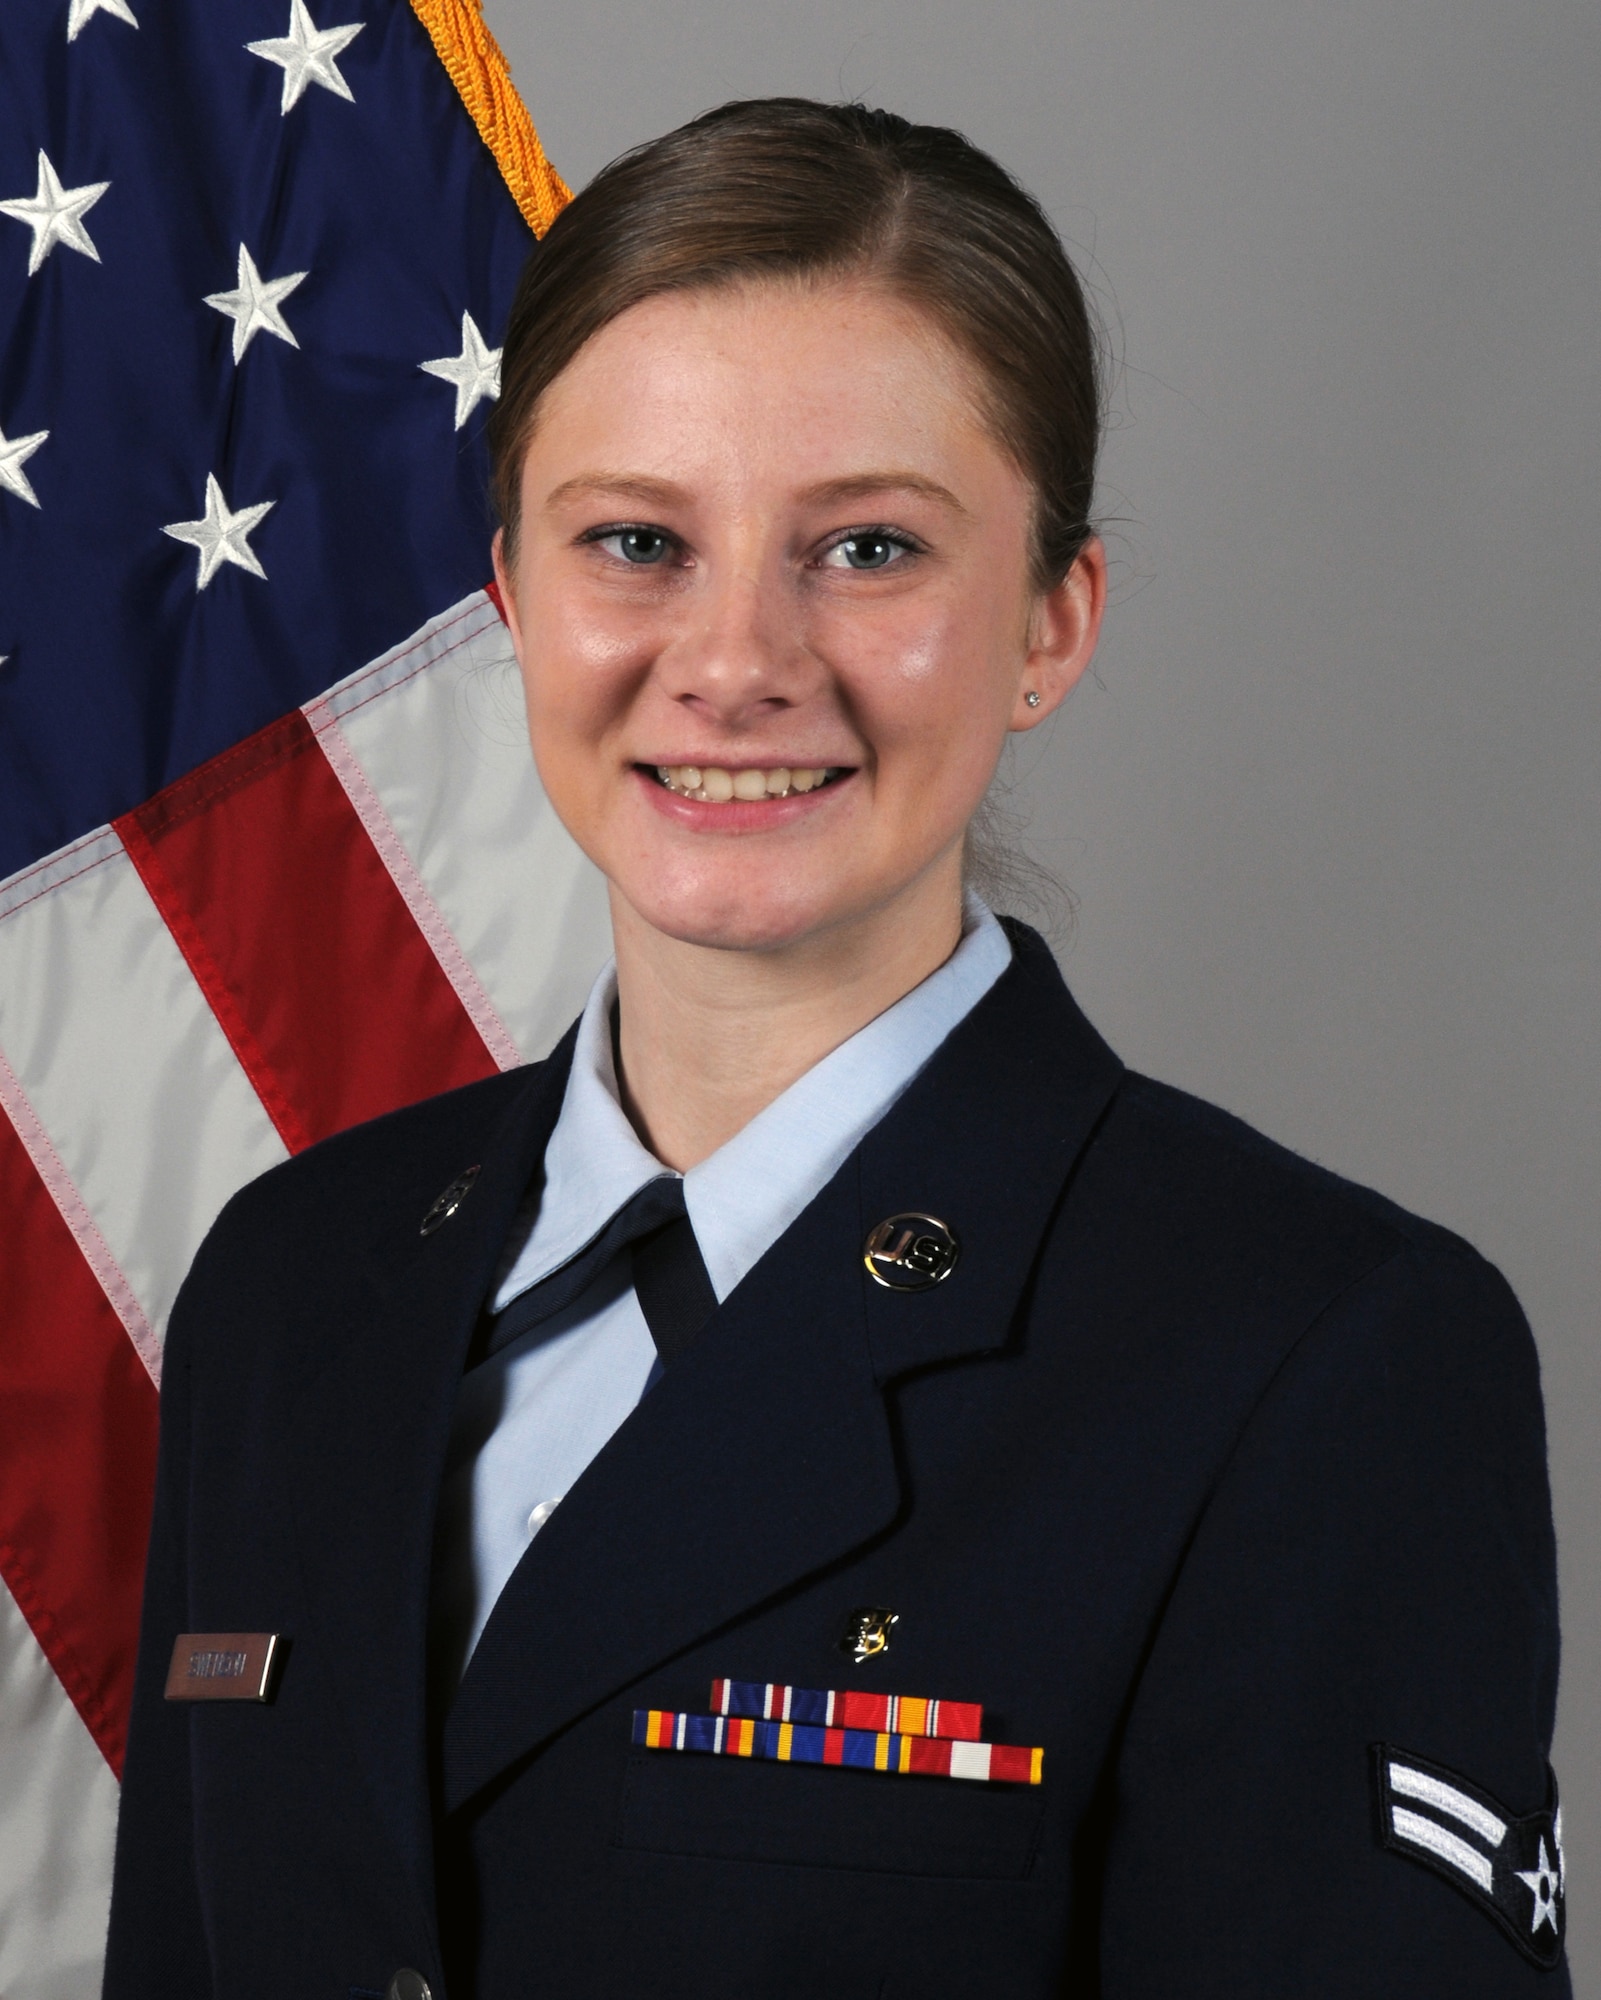 Senior Airman Maggie Swenson, of the 119th Medical Group, is the North Dakota Air National Guard Airman of the year for 2017.